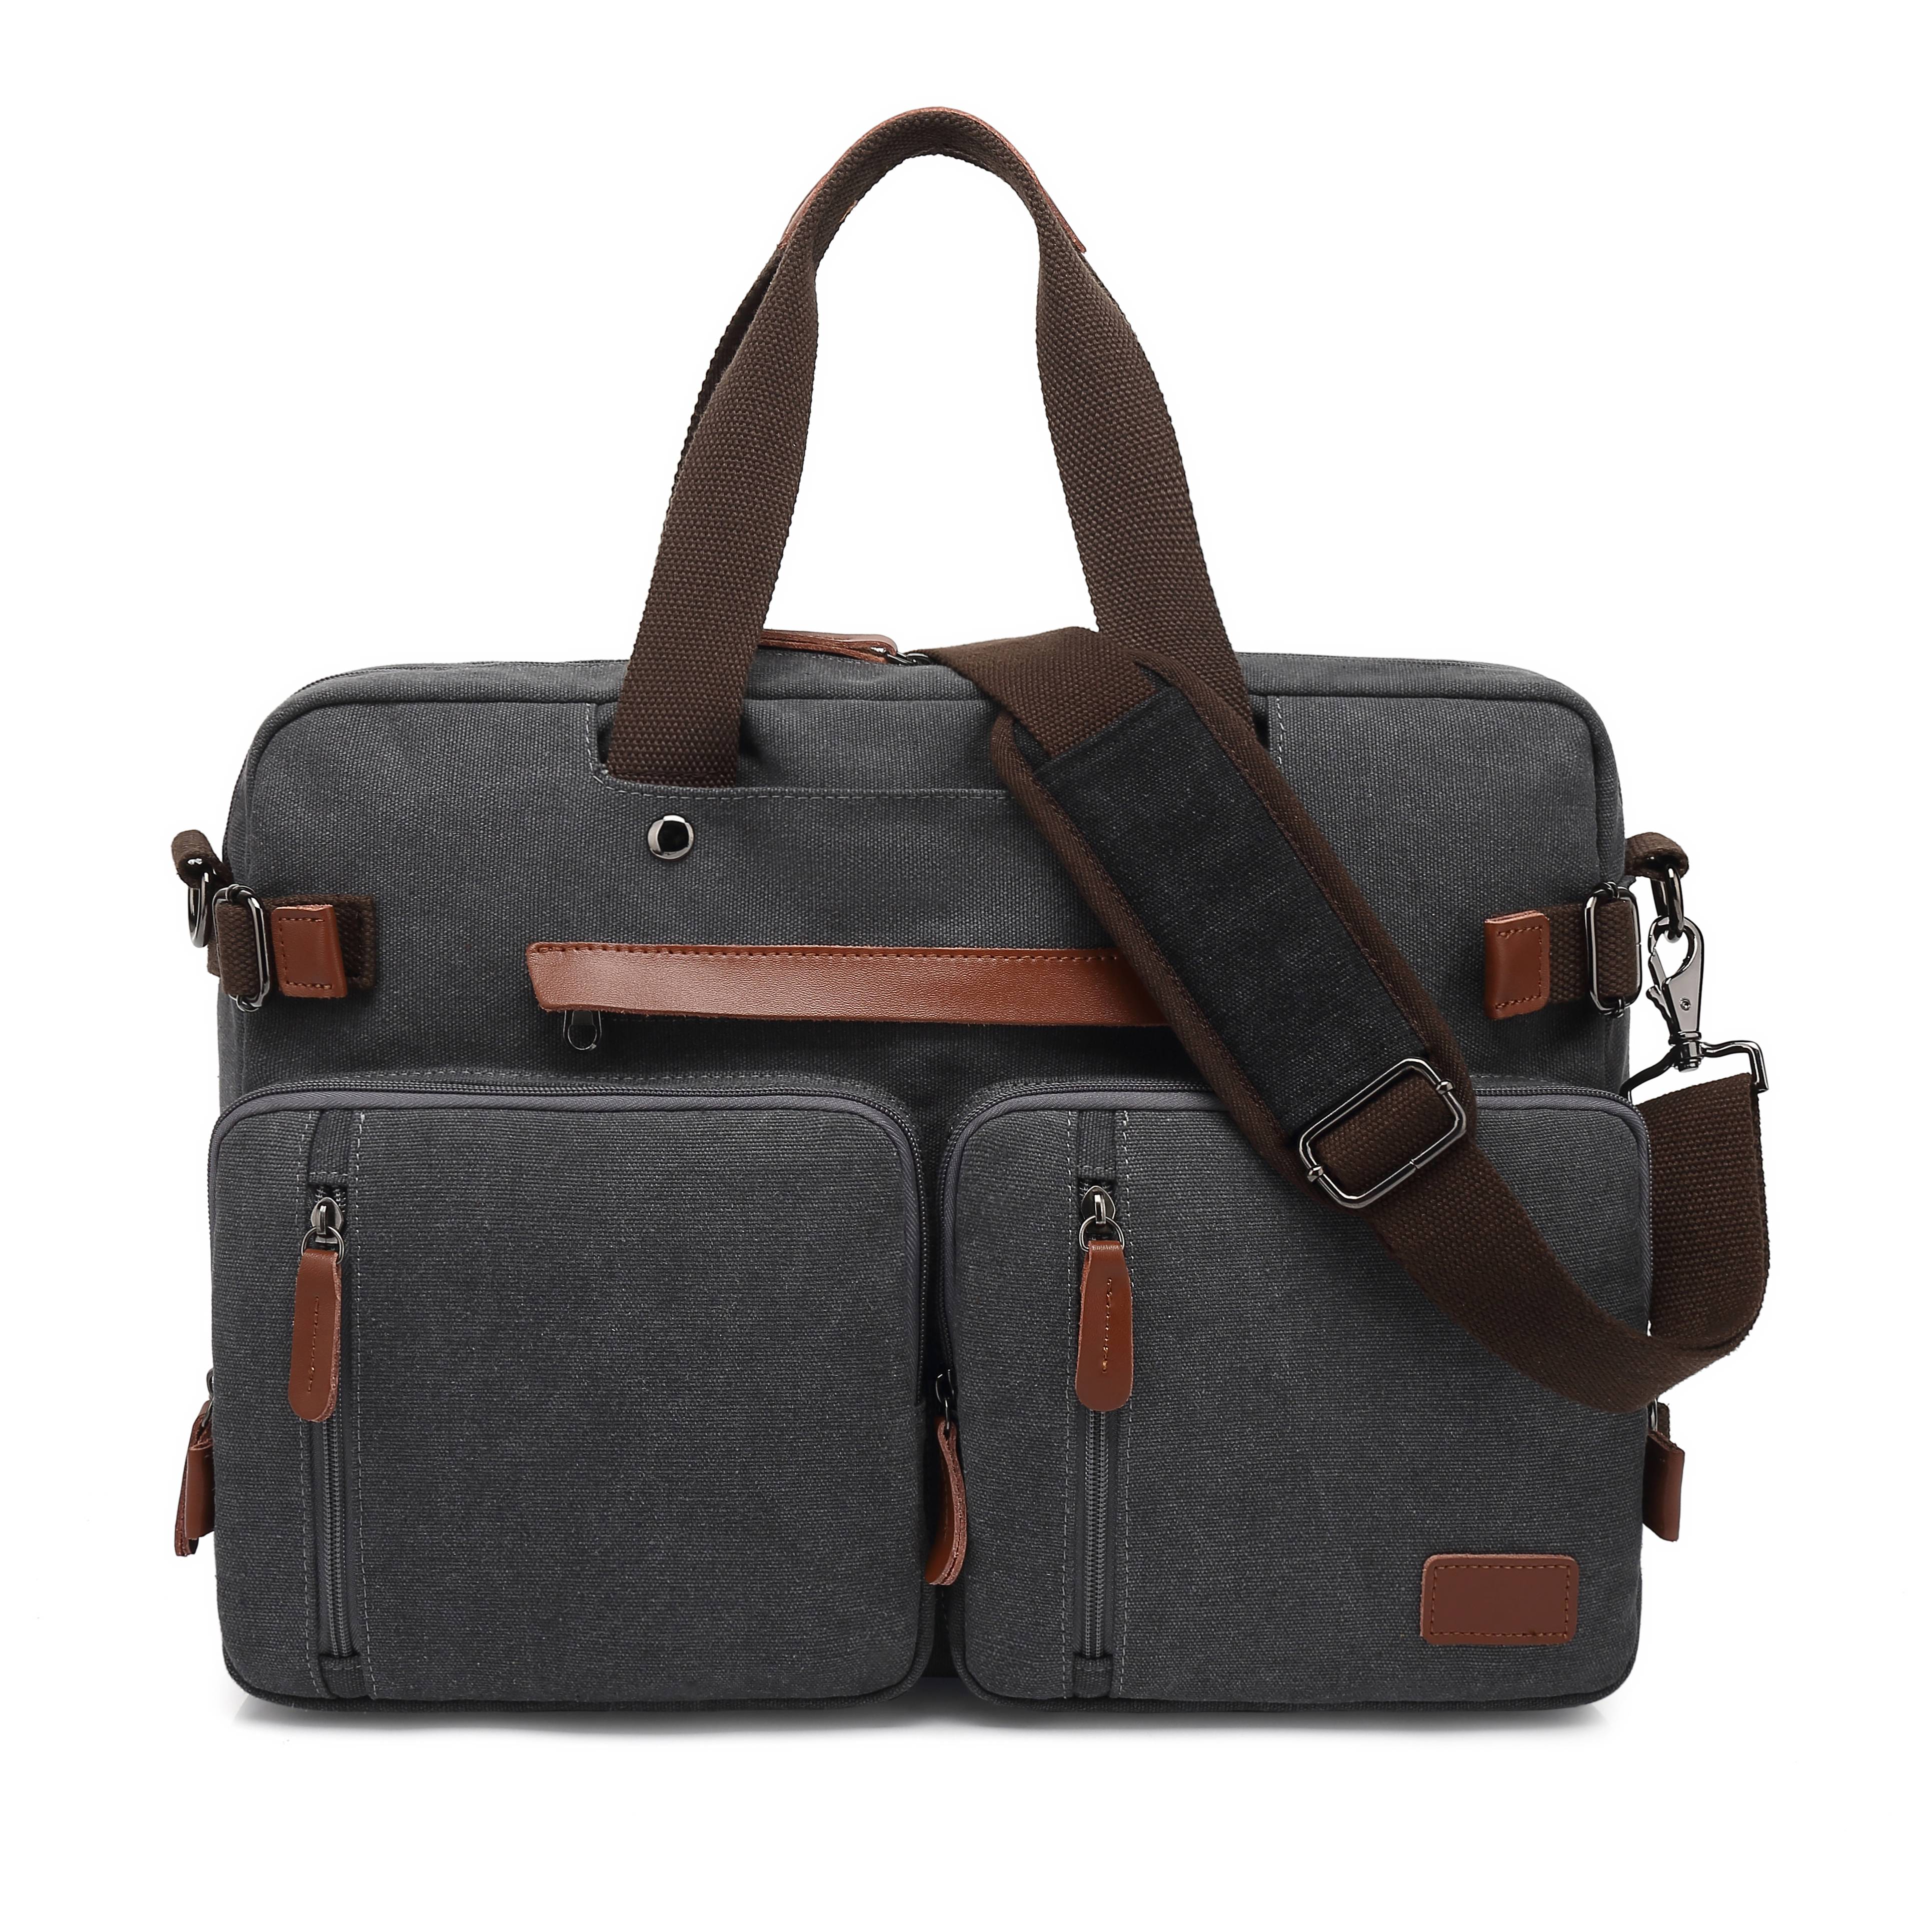 15 Functional and Cool Messenger Bags for Men